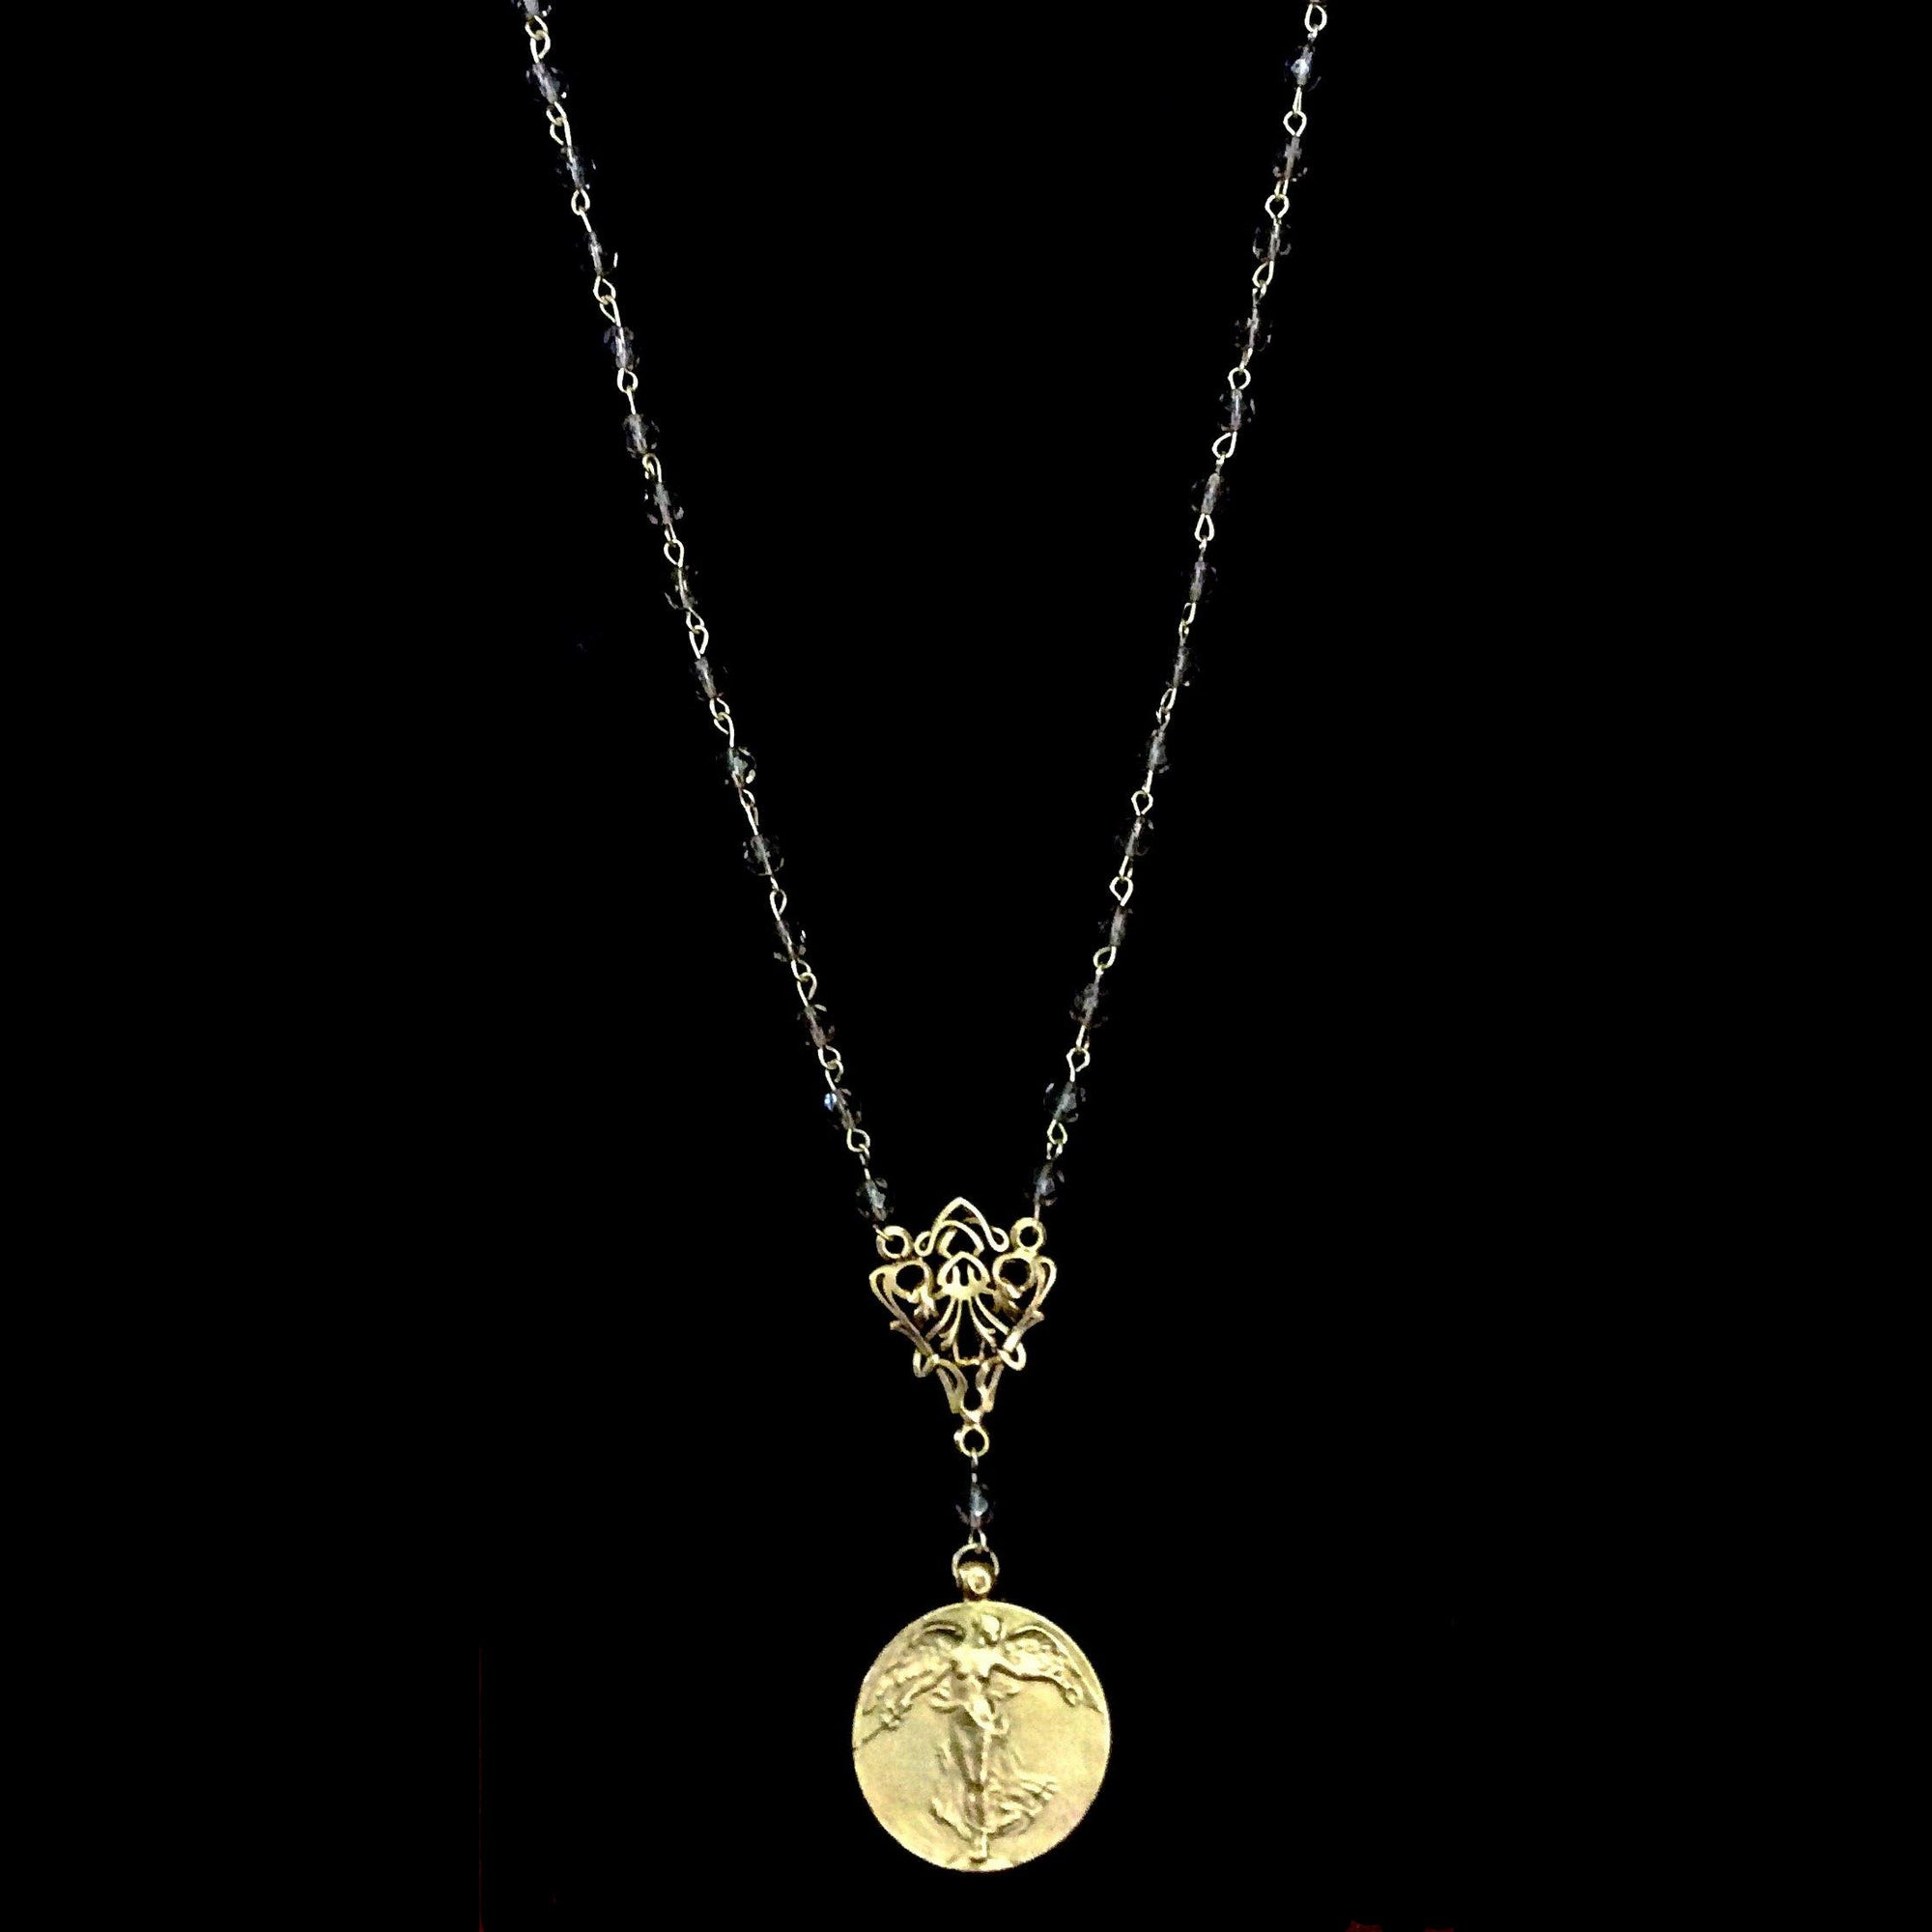 Peace Angel Necklace Black Diamond & Gold by Whispering Goddess